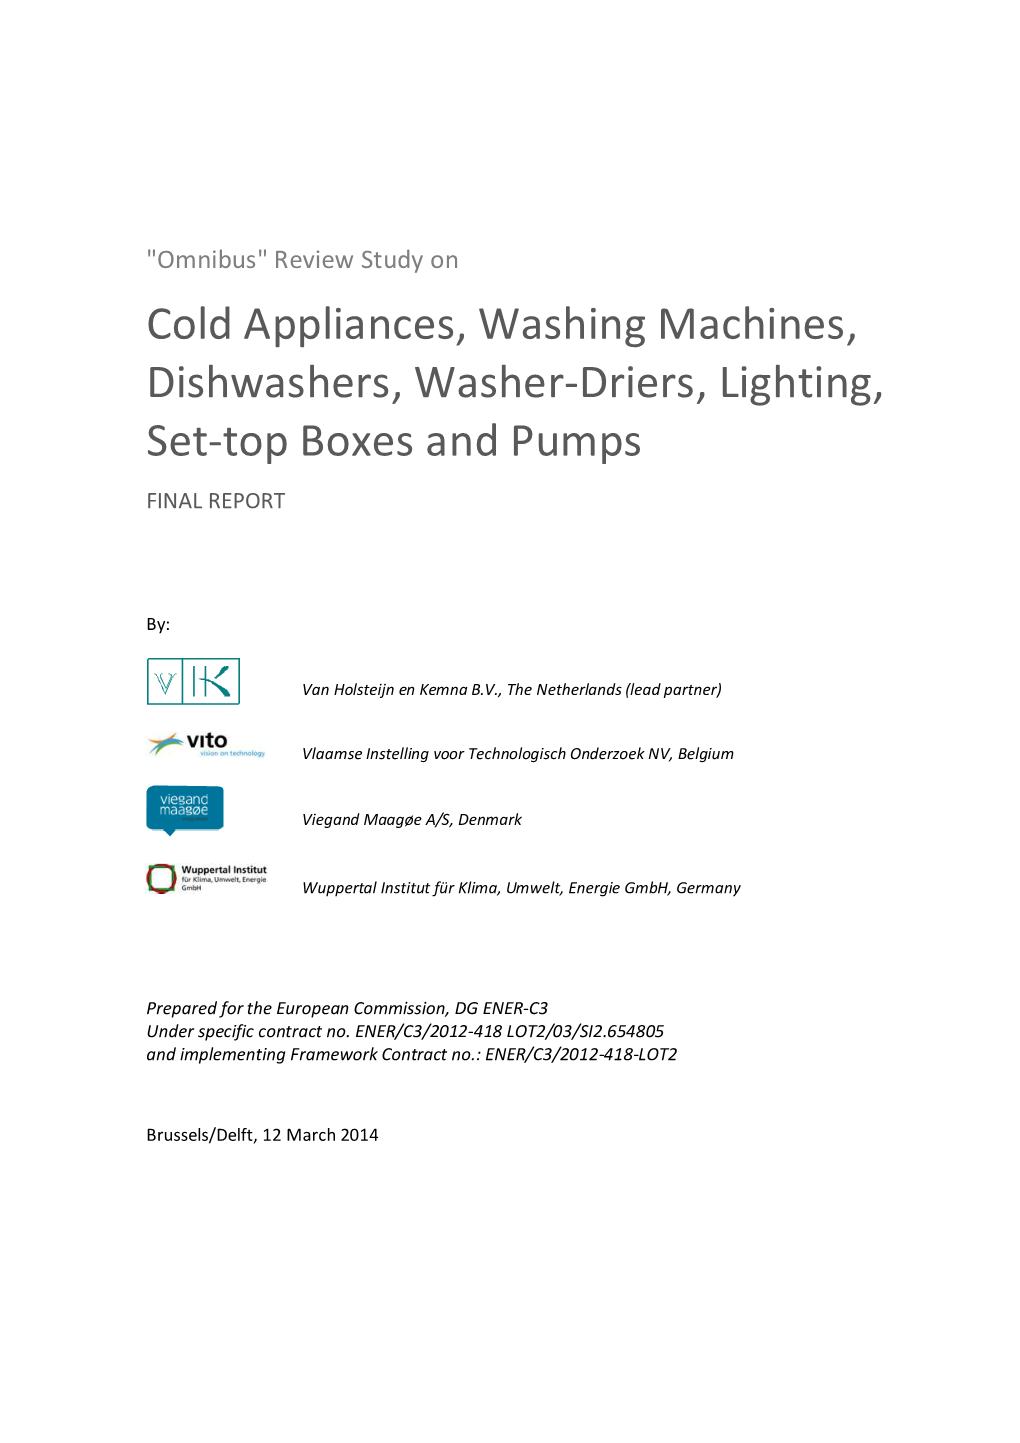 Cold Appliances, Washing Machines, Dishwashers, Washer-Driers, Lighting, Set-Top Boxes and Pumps